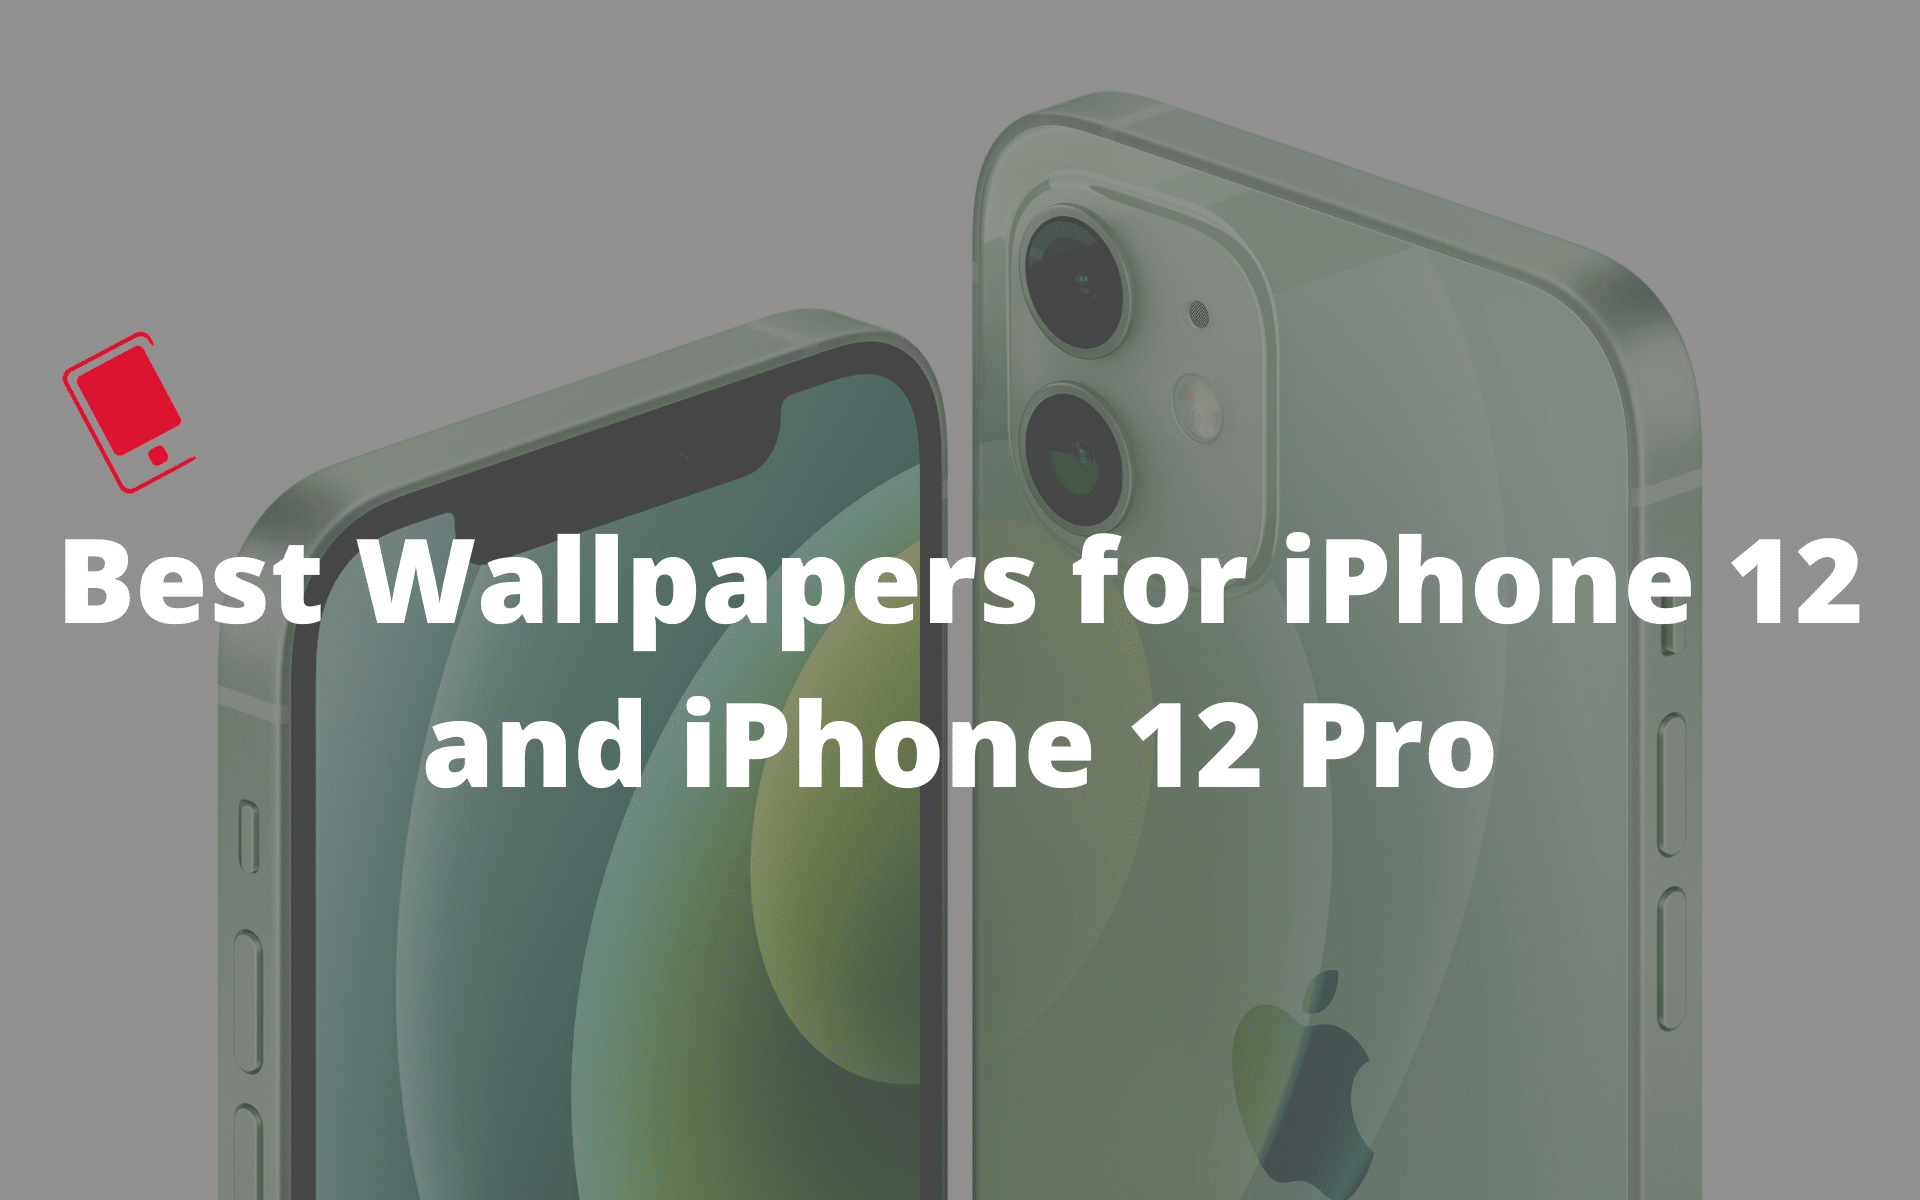 iPhone 12 and iPhone 12 Pro wallpapers